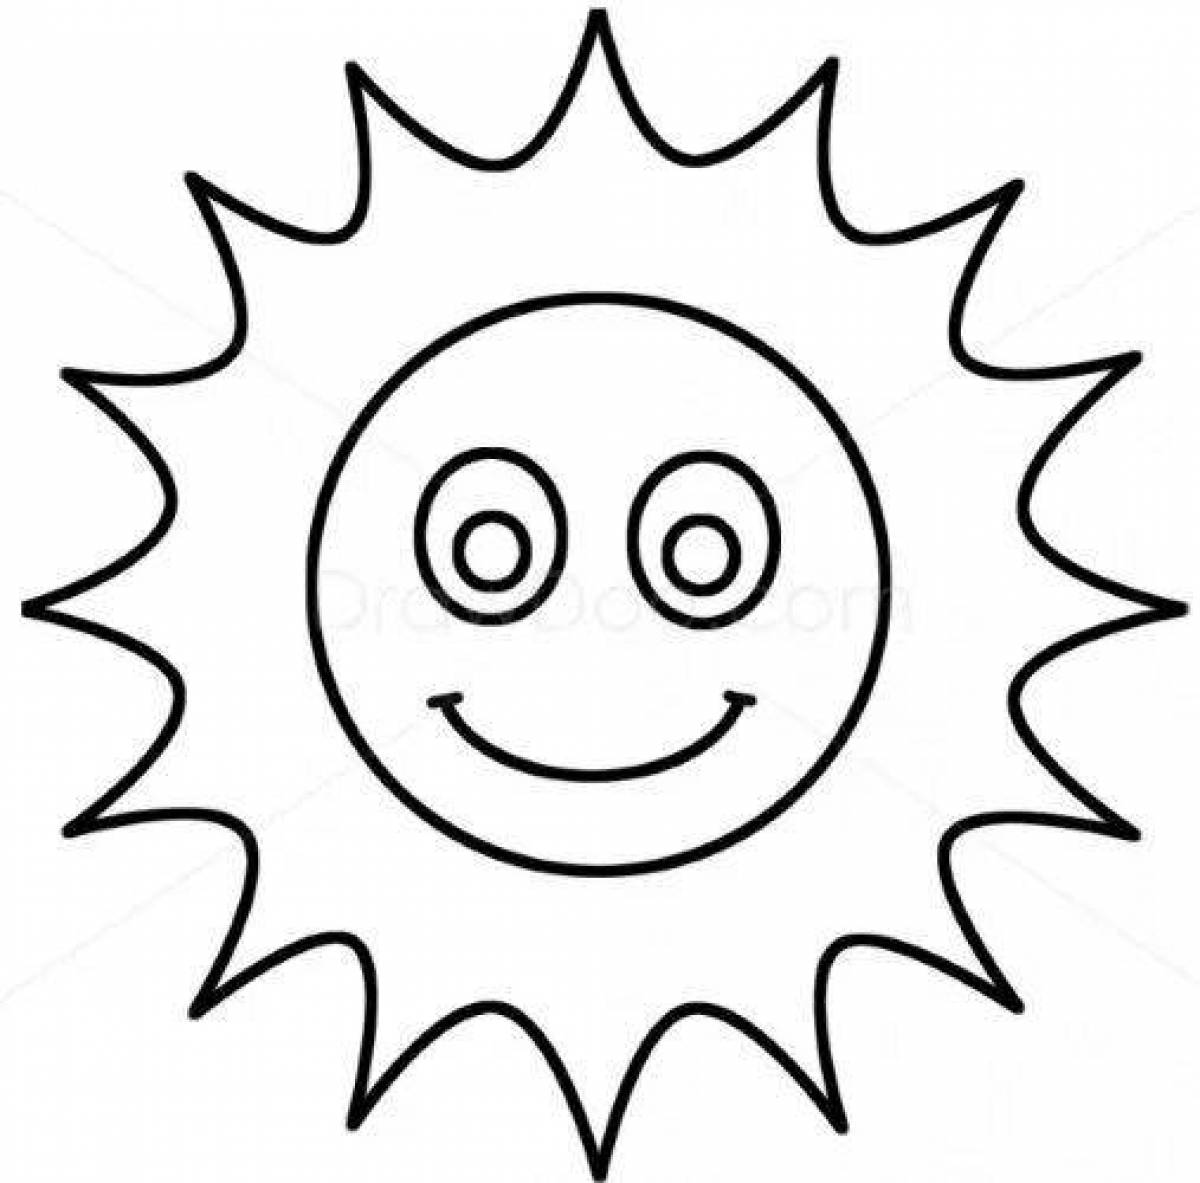 Coloring book shining sun for 3-4 year olds